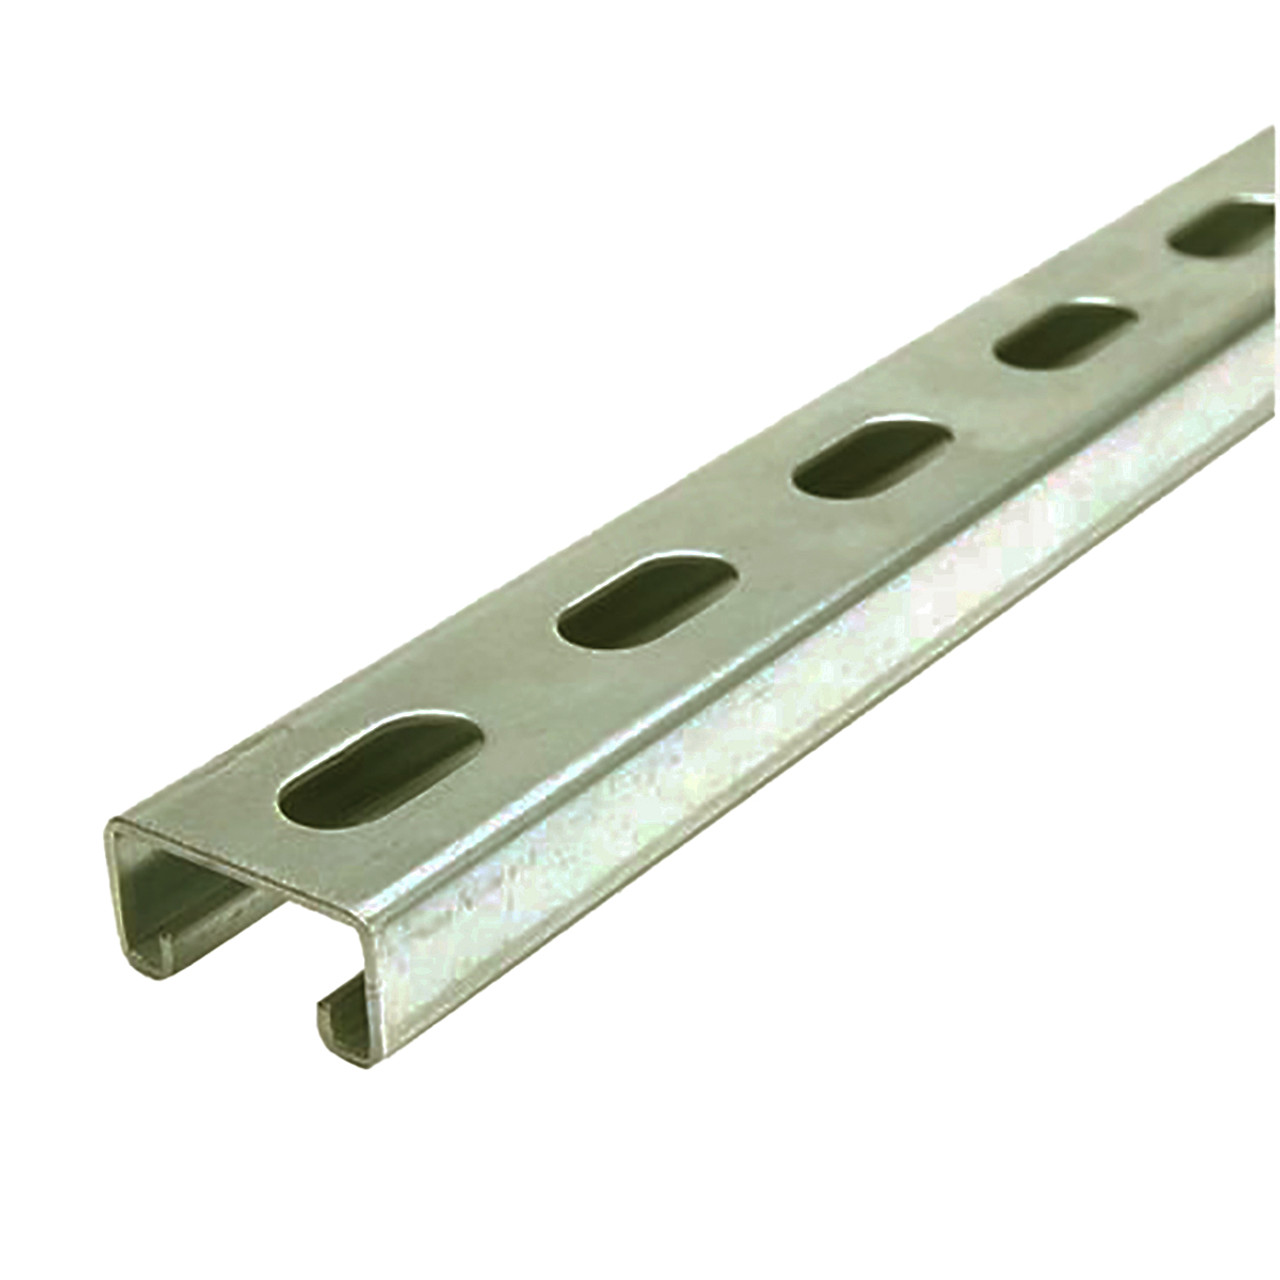 0.812" x 1.625" x 24 inches, Gold Galvanized Steel, Slotted Strut Channel, 14 ga.